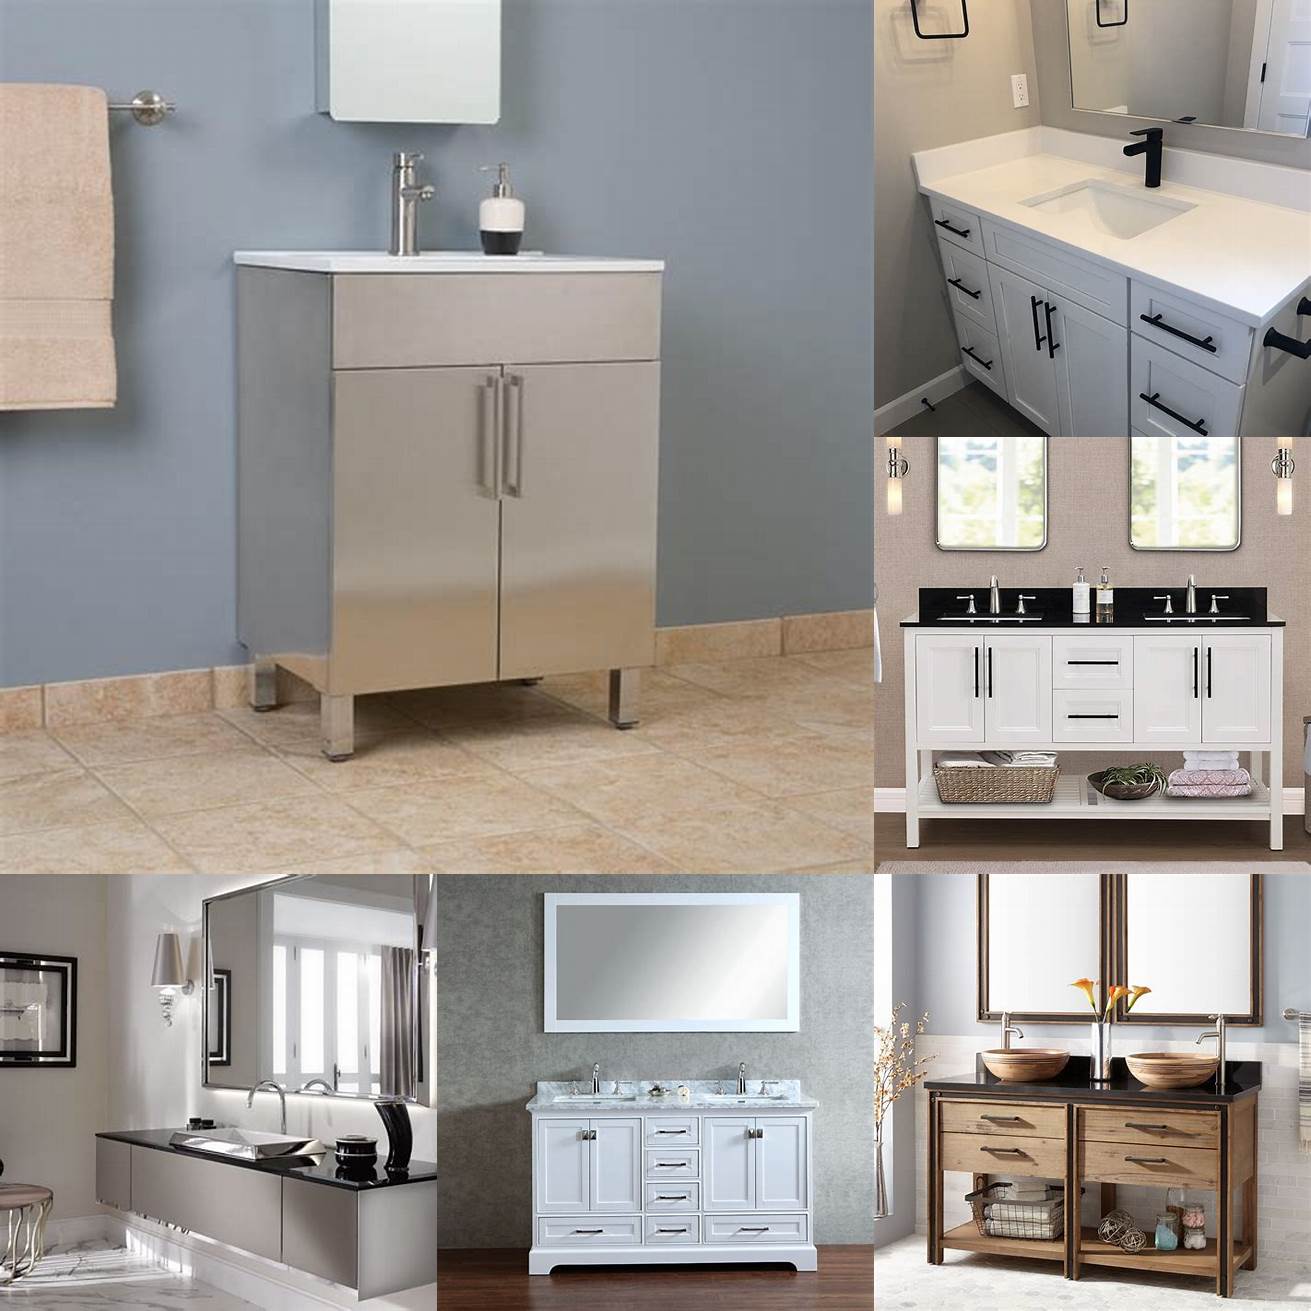 3 Value Metal vanities can increase the value of your home as they are considered a high-end material that adds a touch of luxury to your bathroom